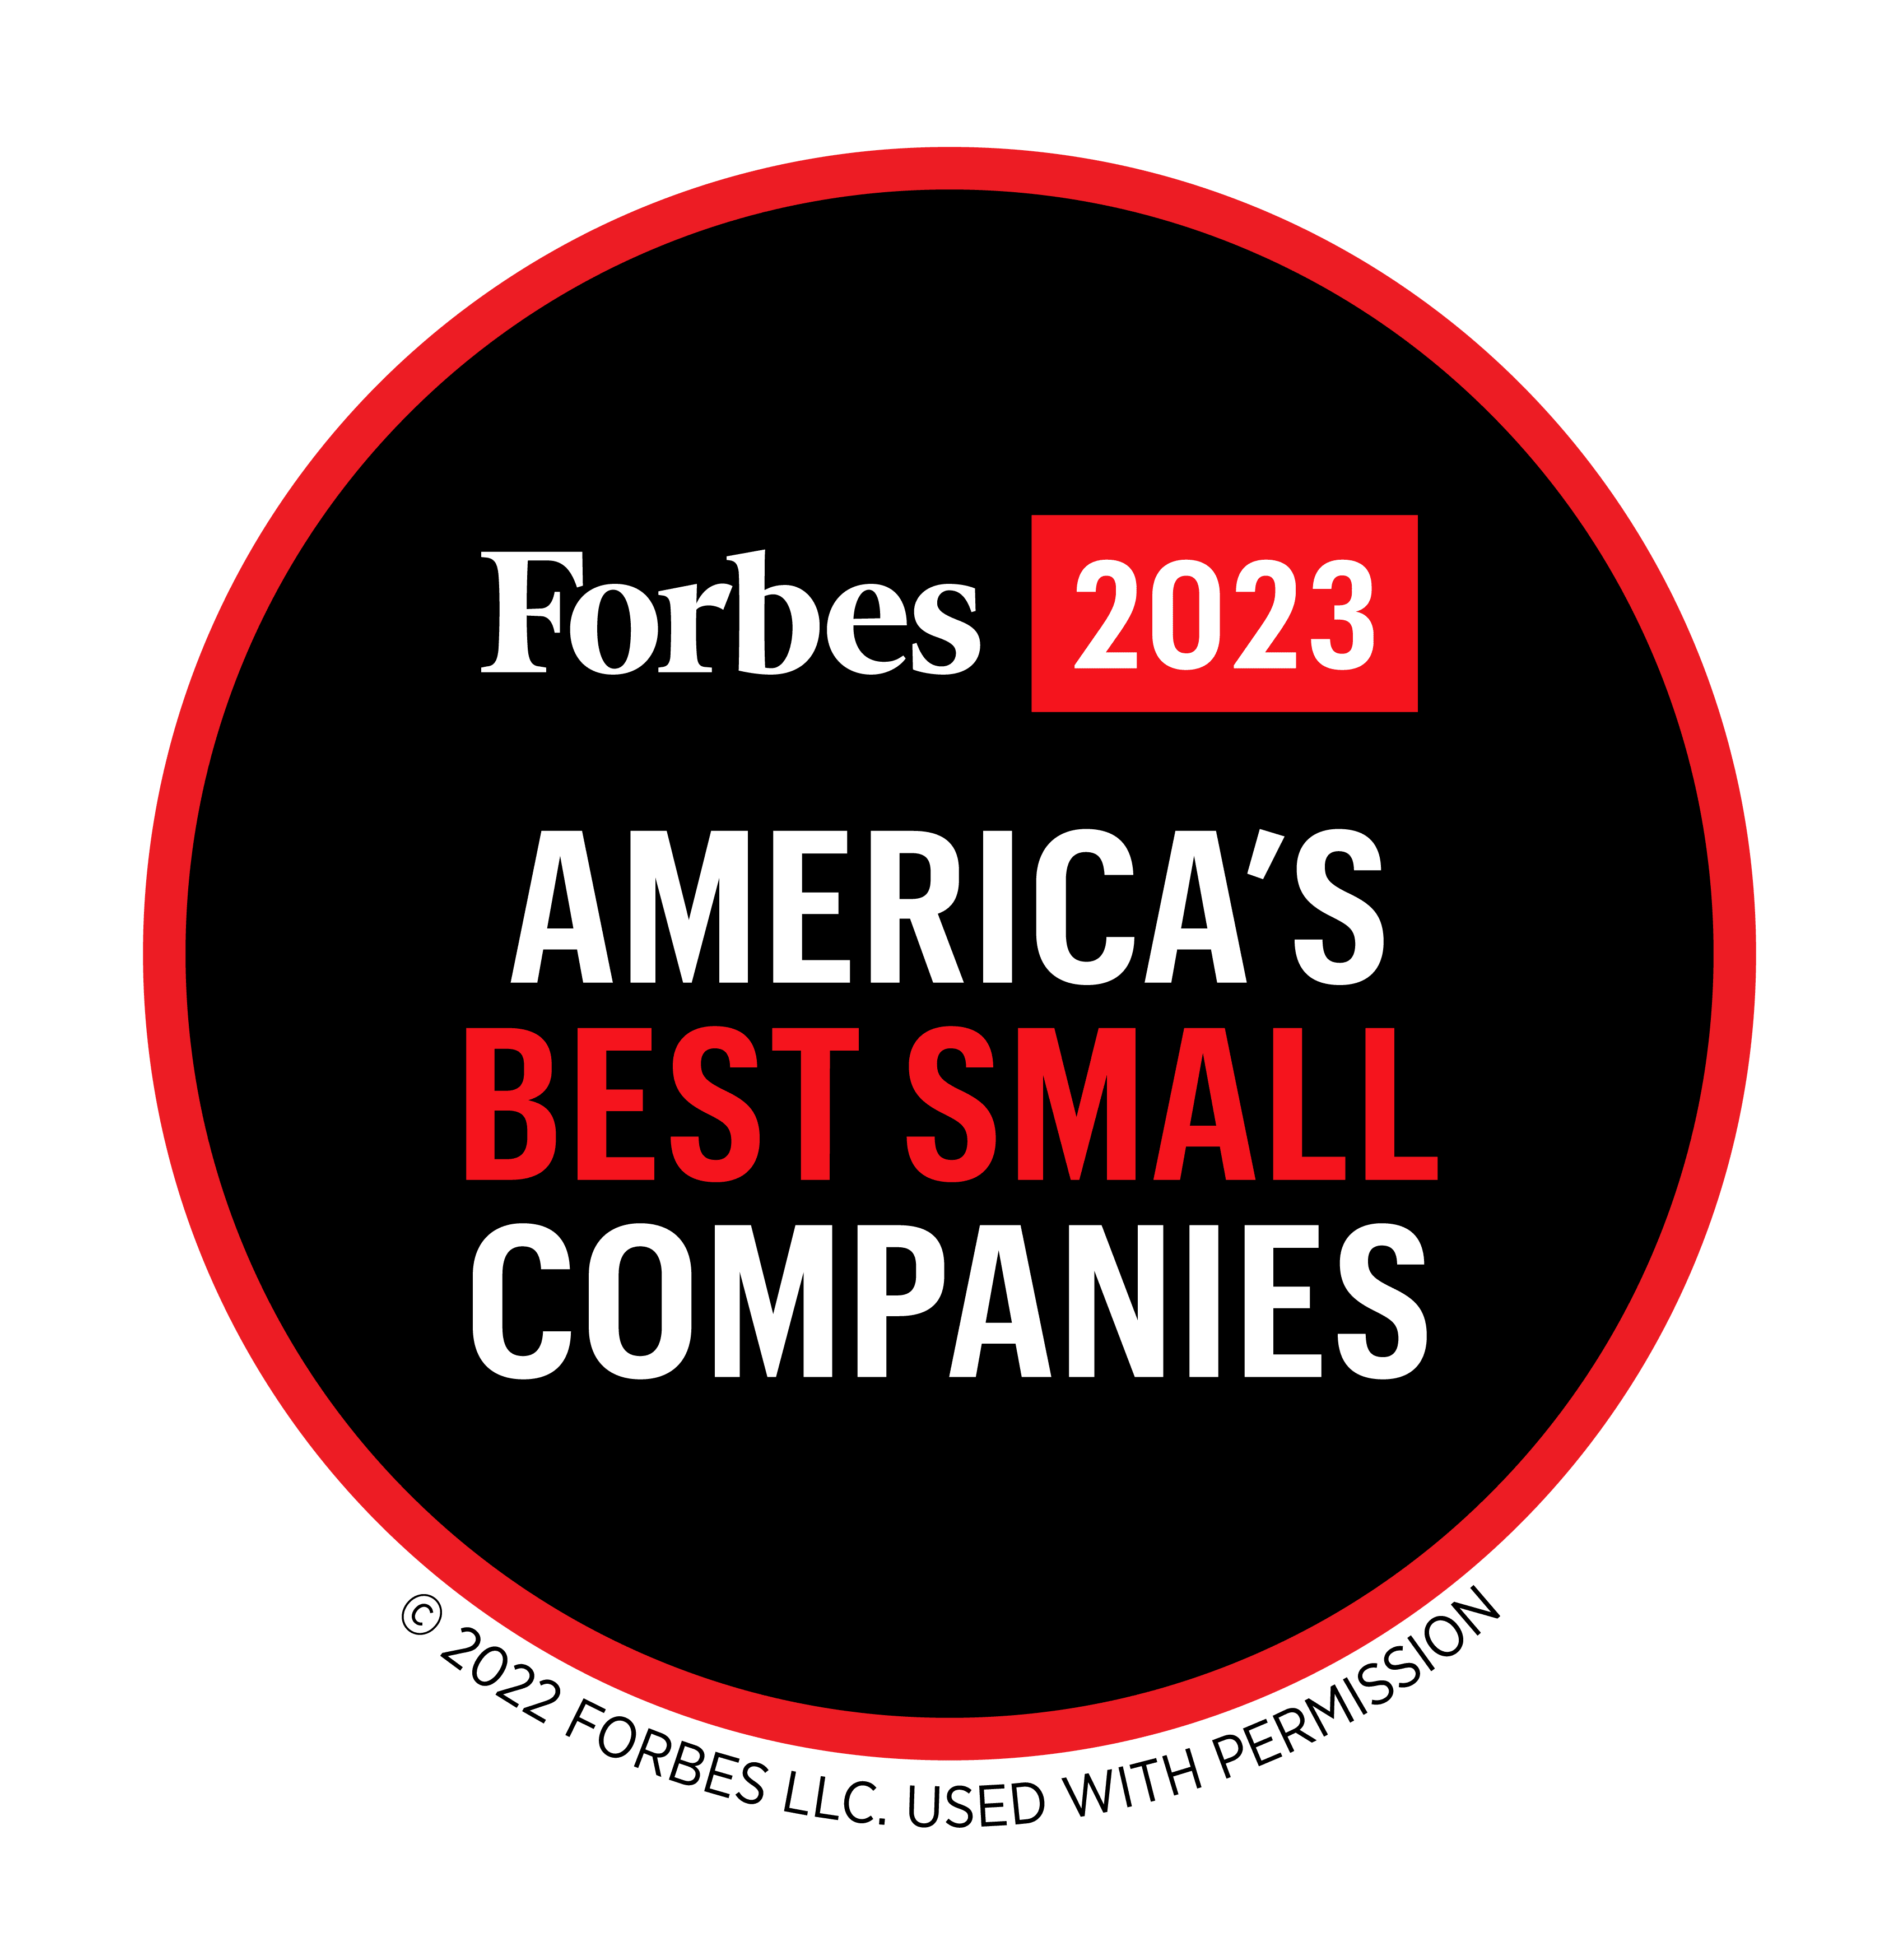 Forbes 2023 America's Best Small Companies